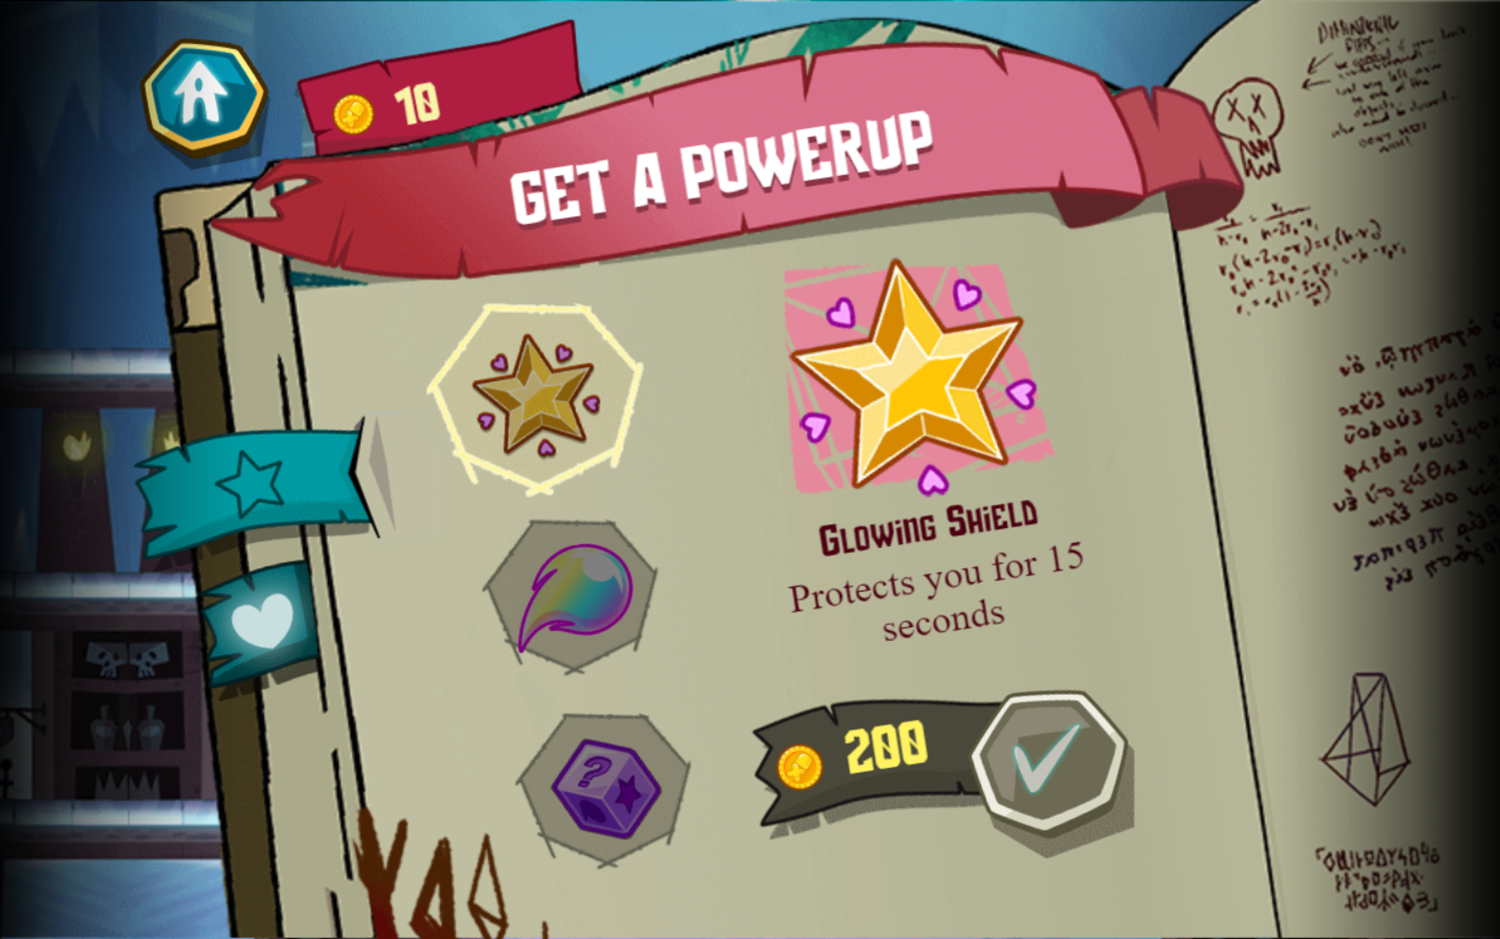 Star vs the Forces of Evil Quest Buy Rush Game Buy Power Up Screenshot.